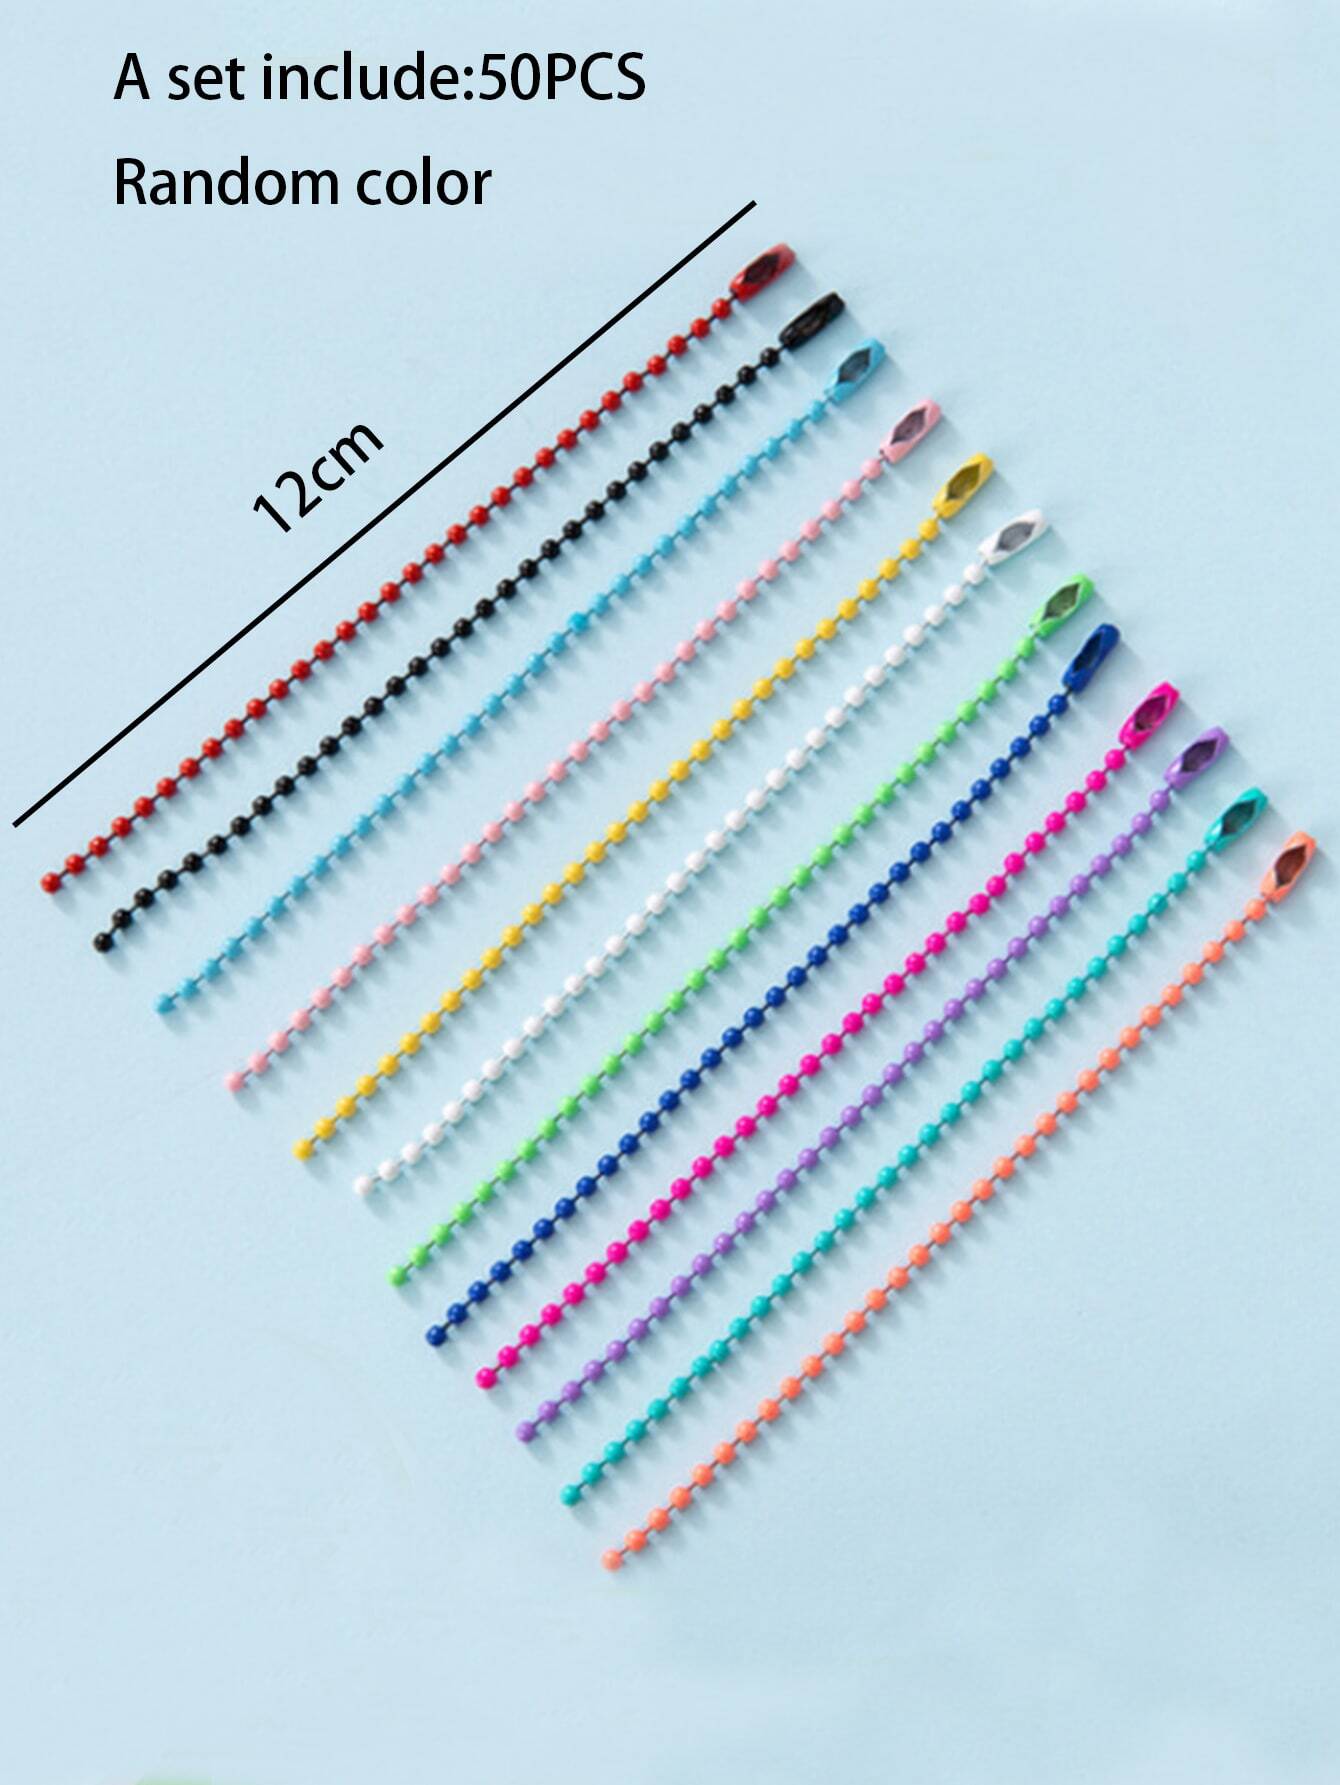 50pcs Random Color Ball Beaded Chain, Colorful Zipper Pull For Clothing